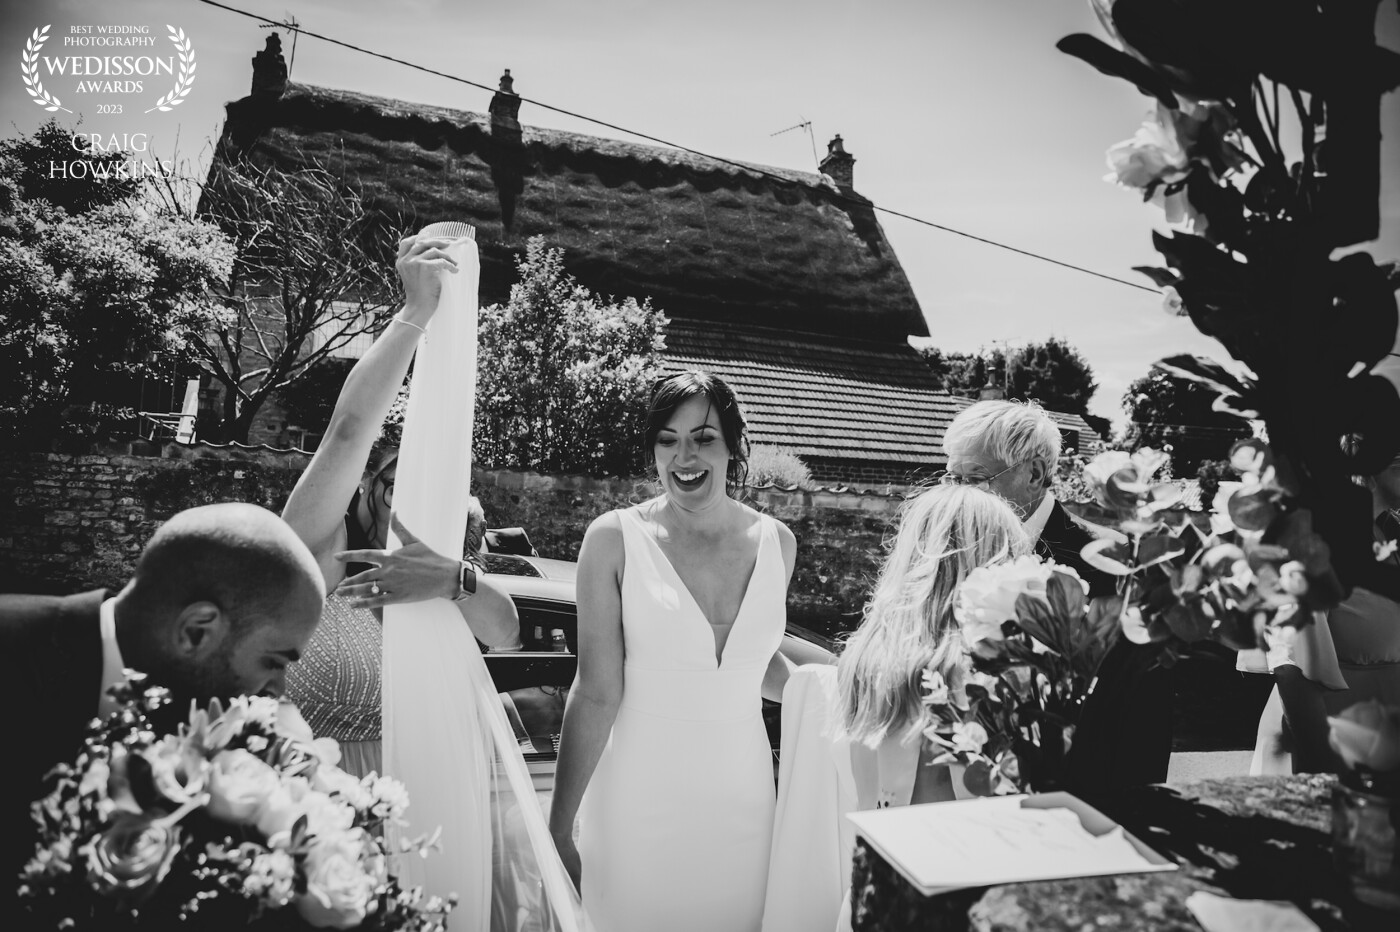 This picture of the bride getting ready outside the church, shows that it pays off to be in the right place and the right time... Pure happiness!!